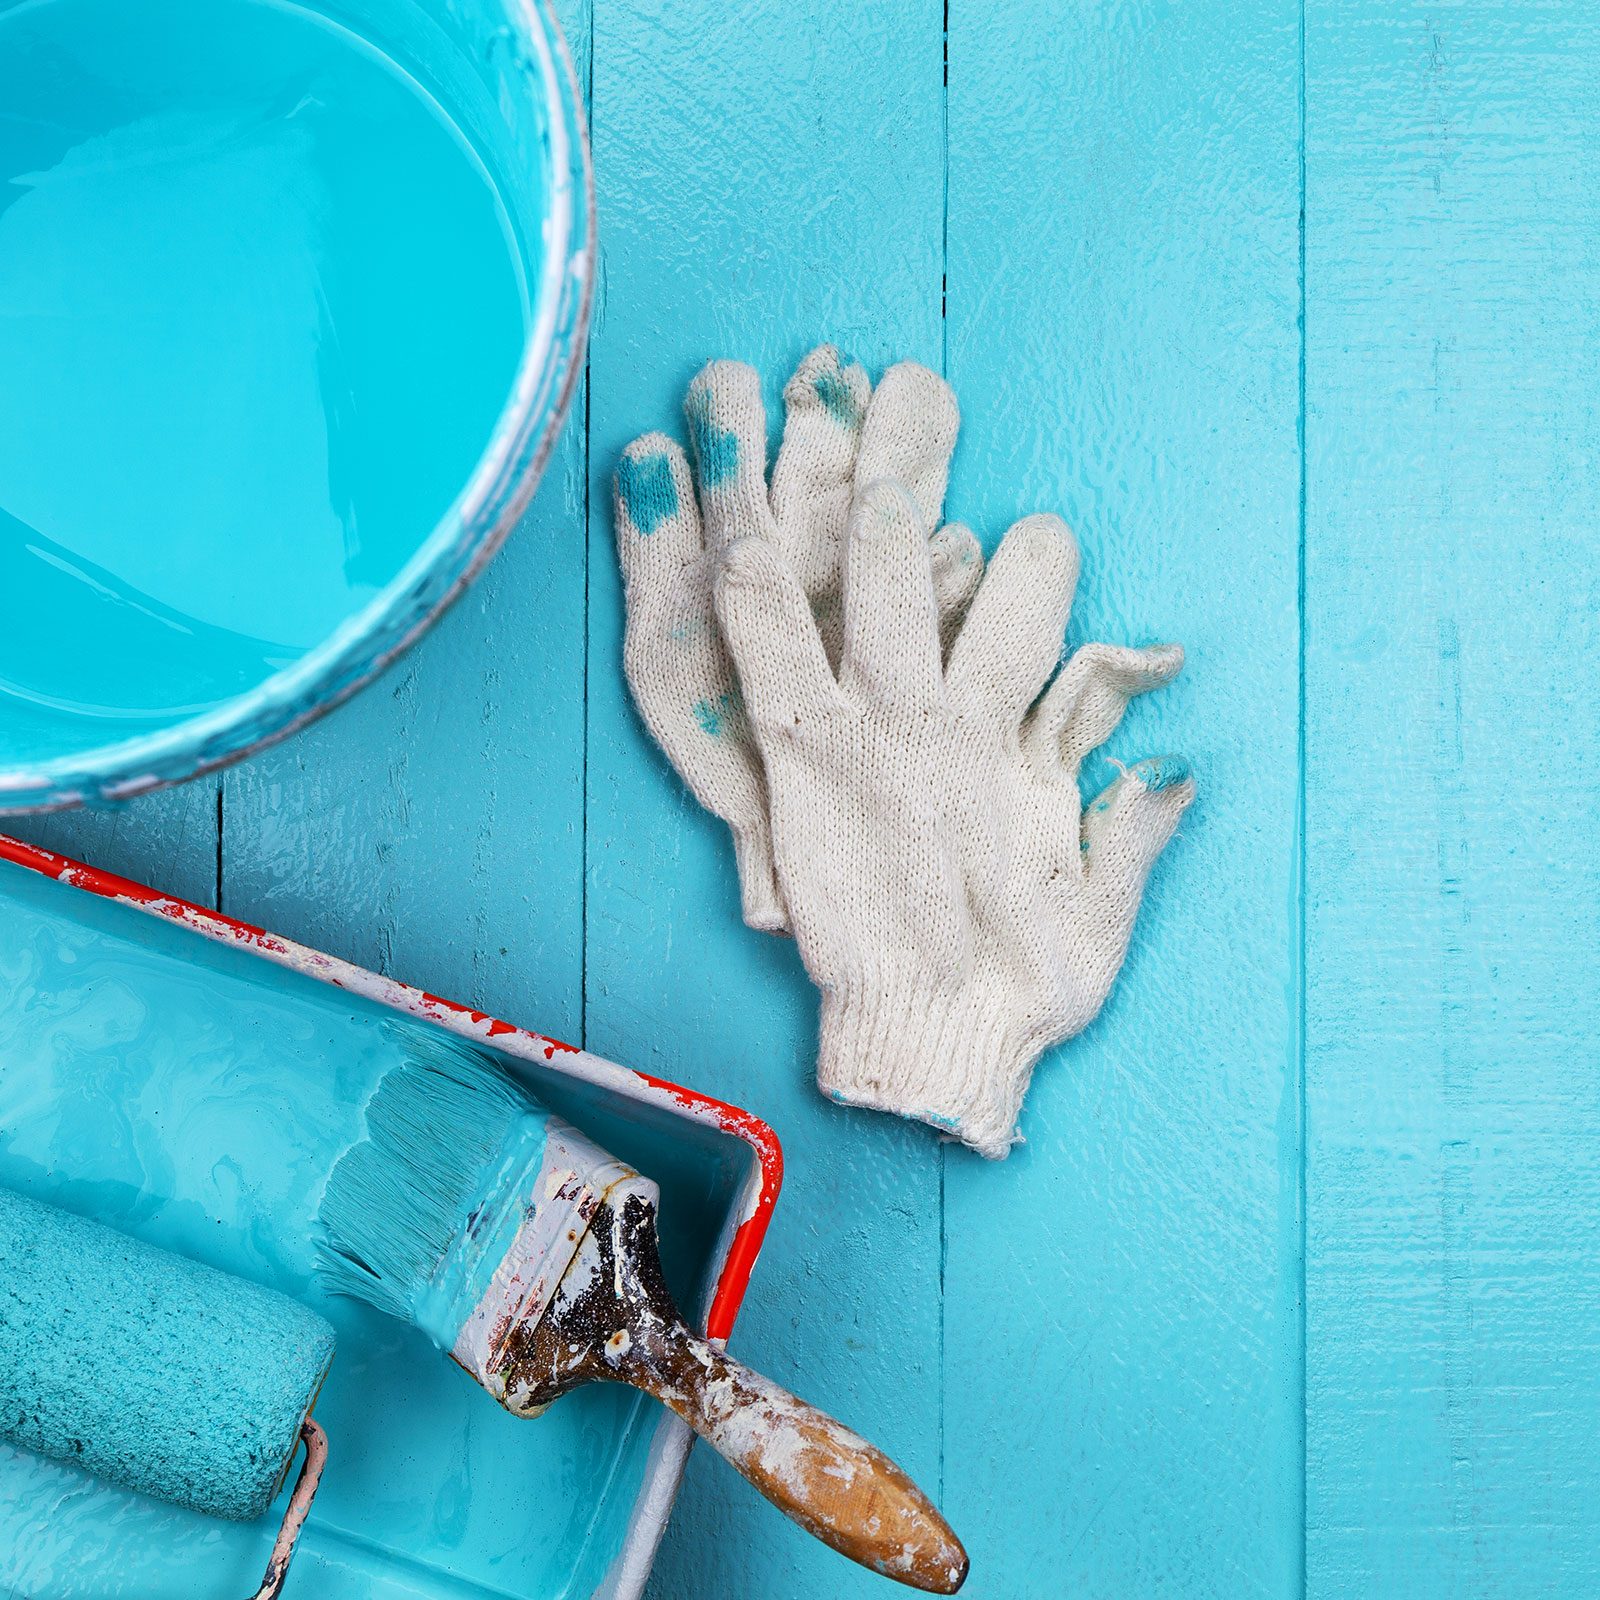 Paint Brush In Teal Blue Color Tray And Paint Bucket, glove On Blue Wooden Background